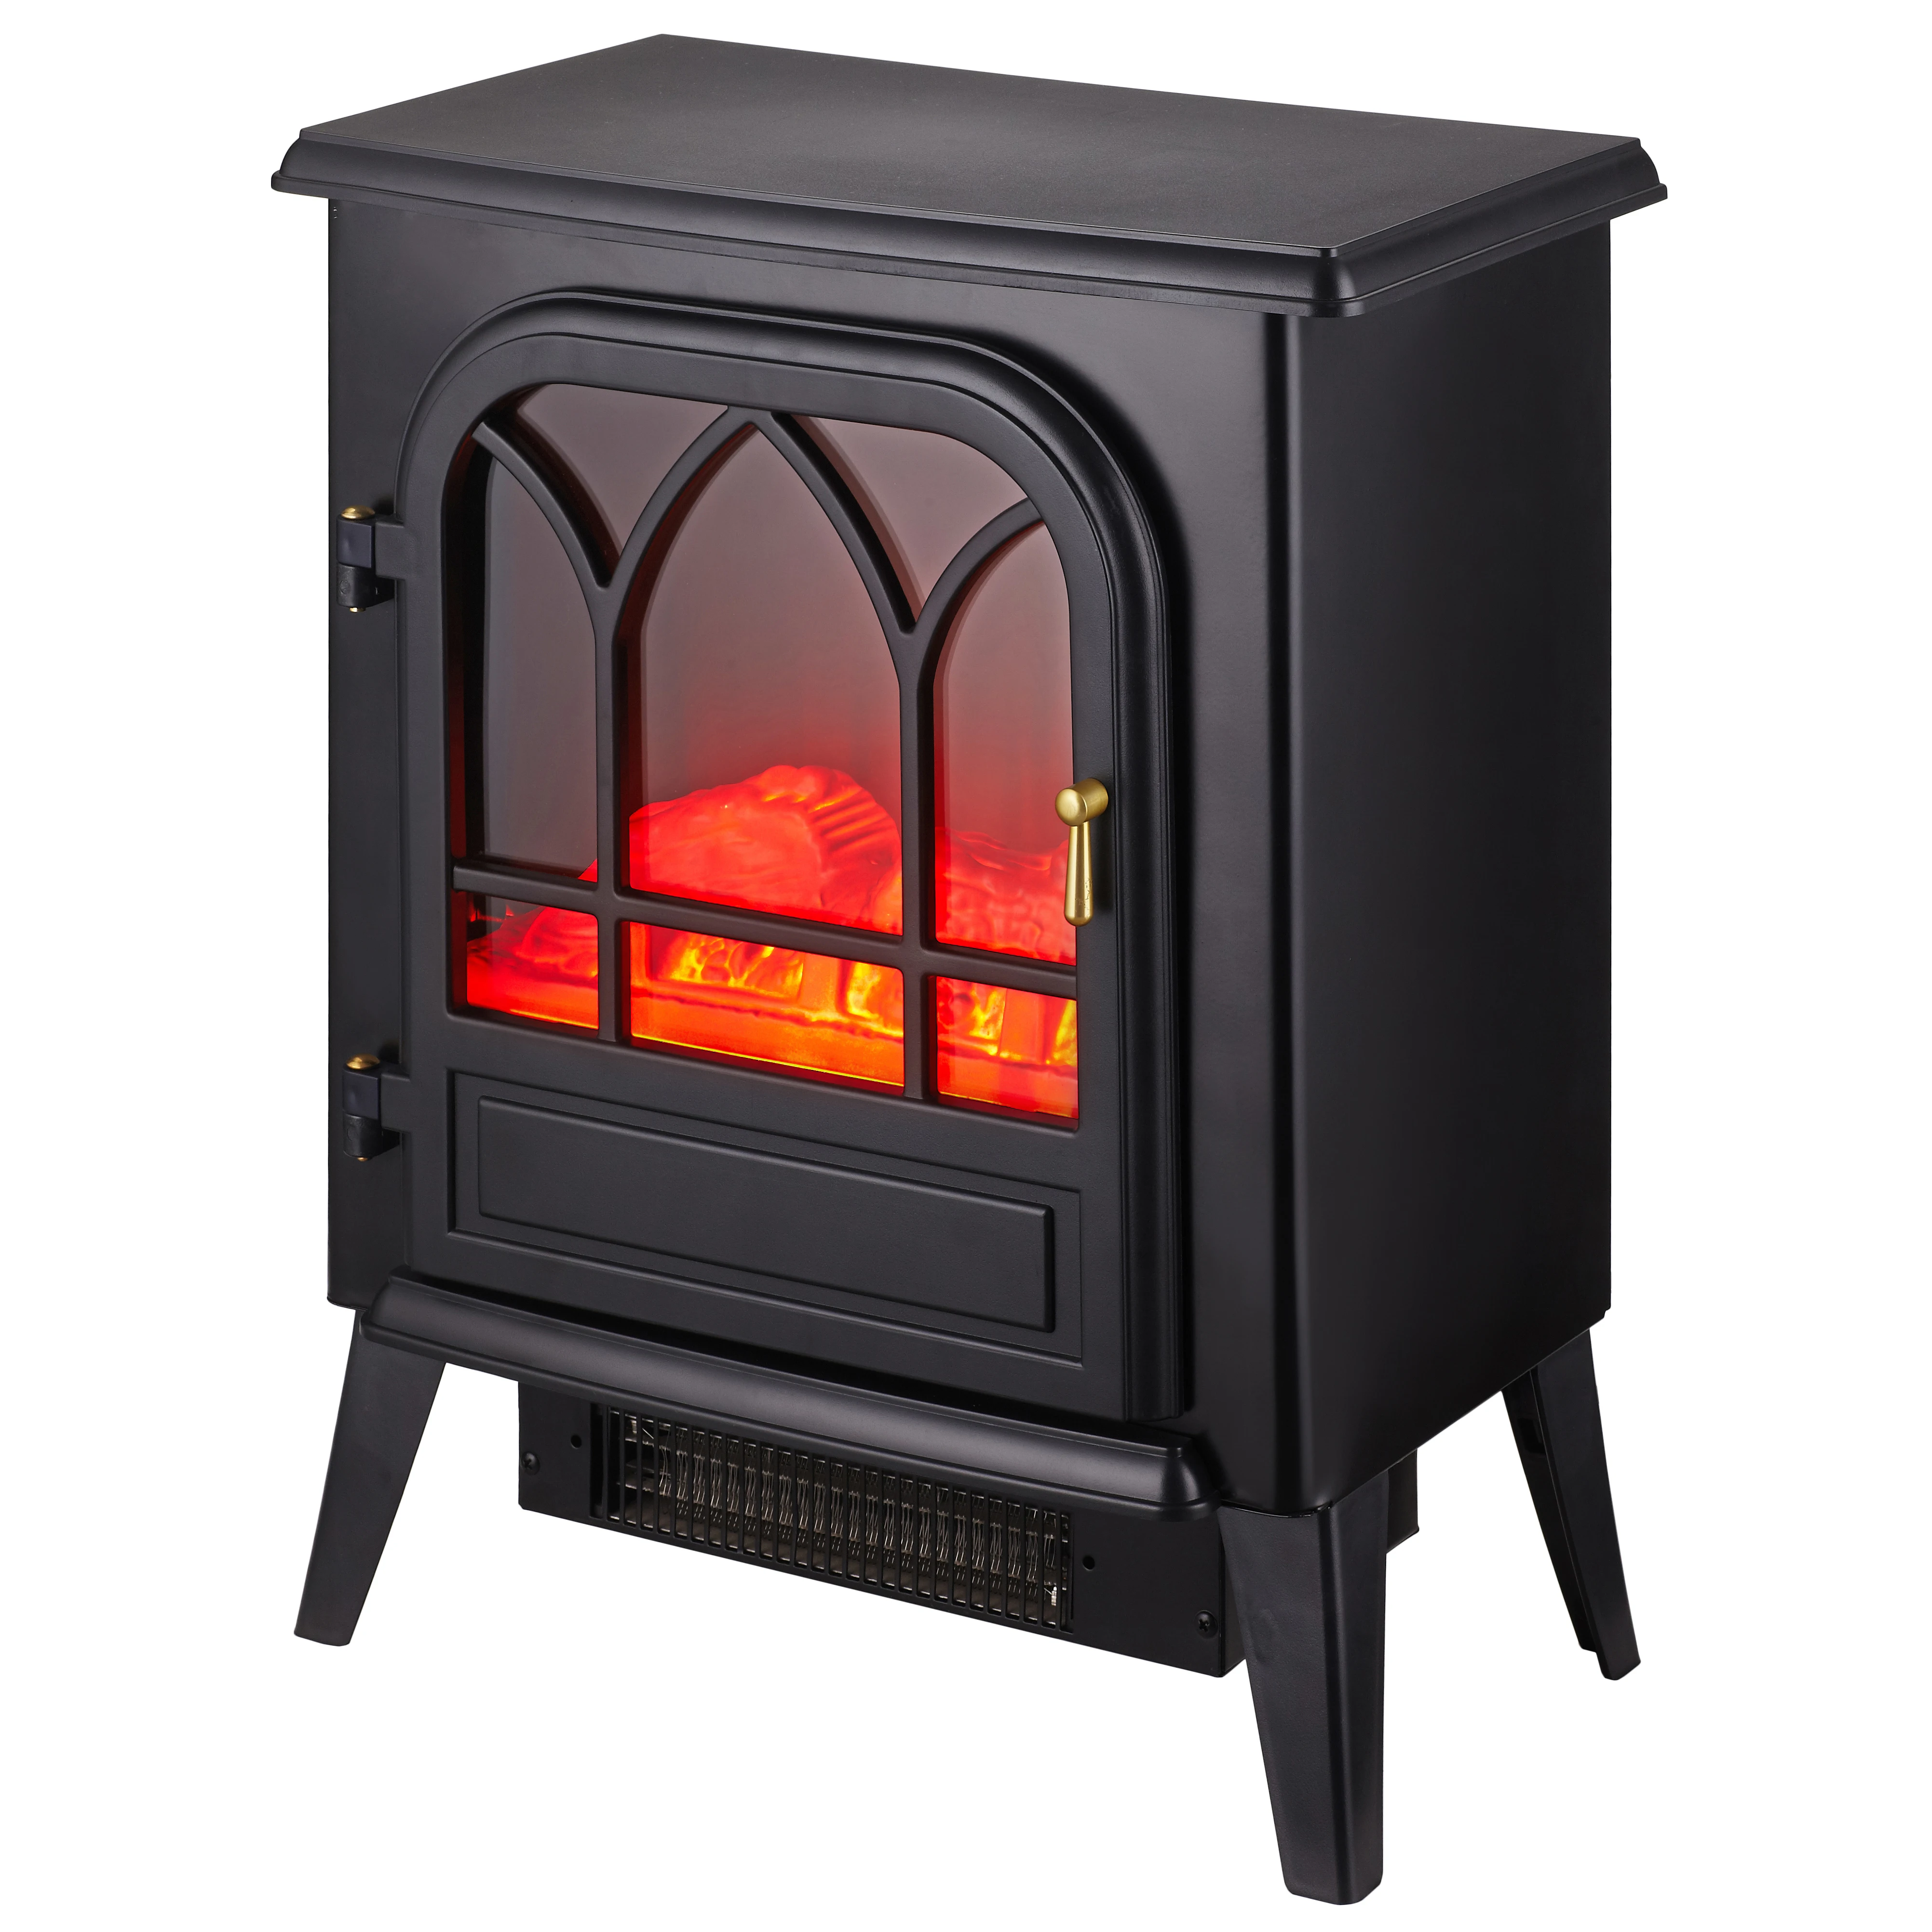 Freestanding Type Plastic Door Flame Effect Modern 3d Media Electric Fireplace Stove View Infrared Electric Stove Alpaca Product Details From Cixi